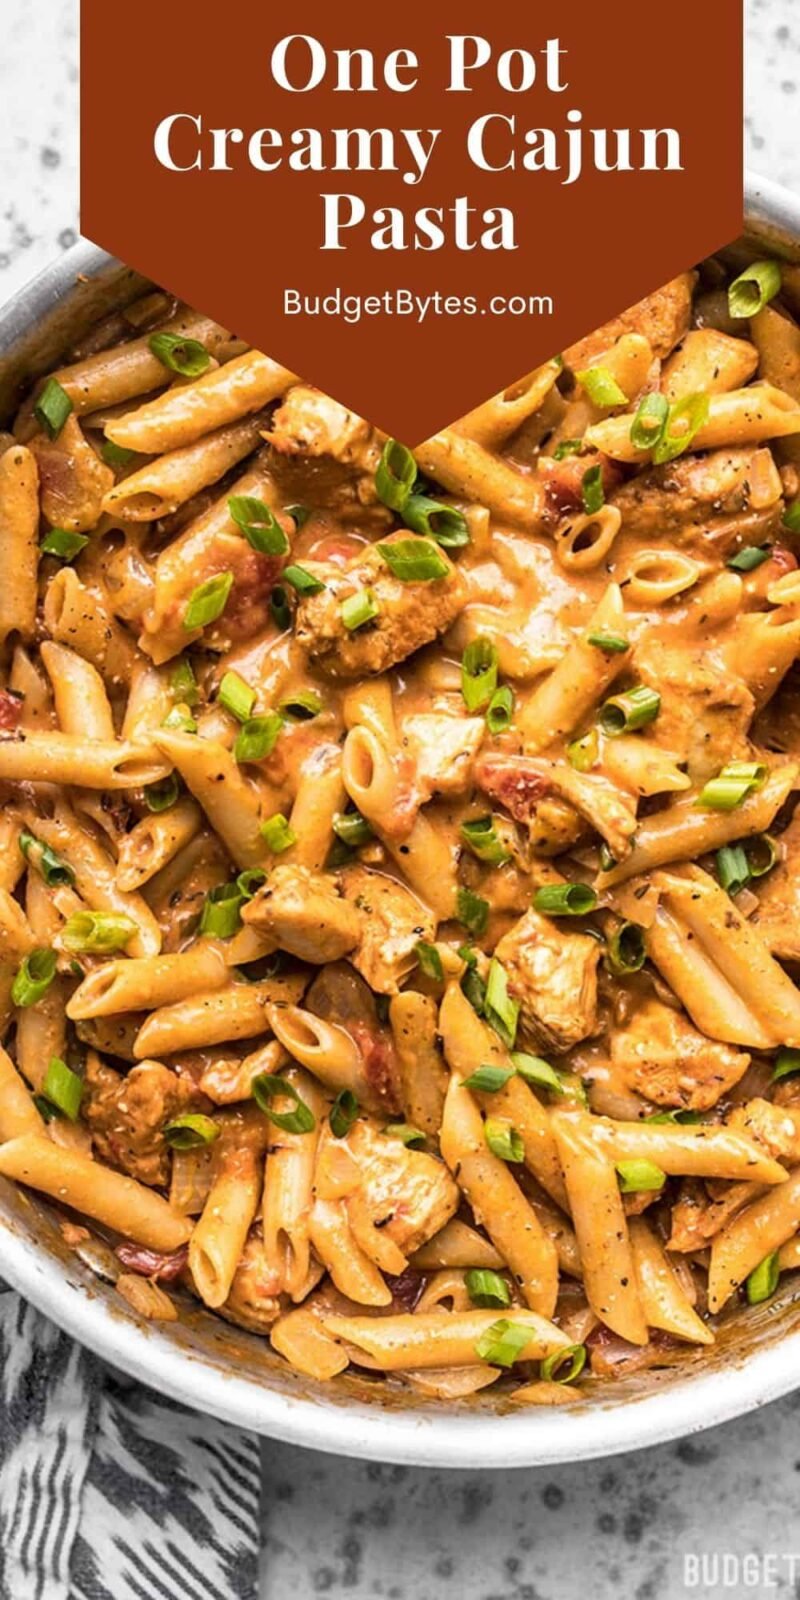 Overhead view of a skillet full of cajun chicken pasta